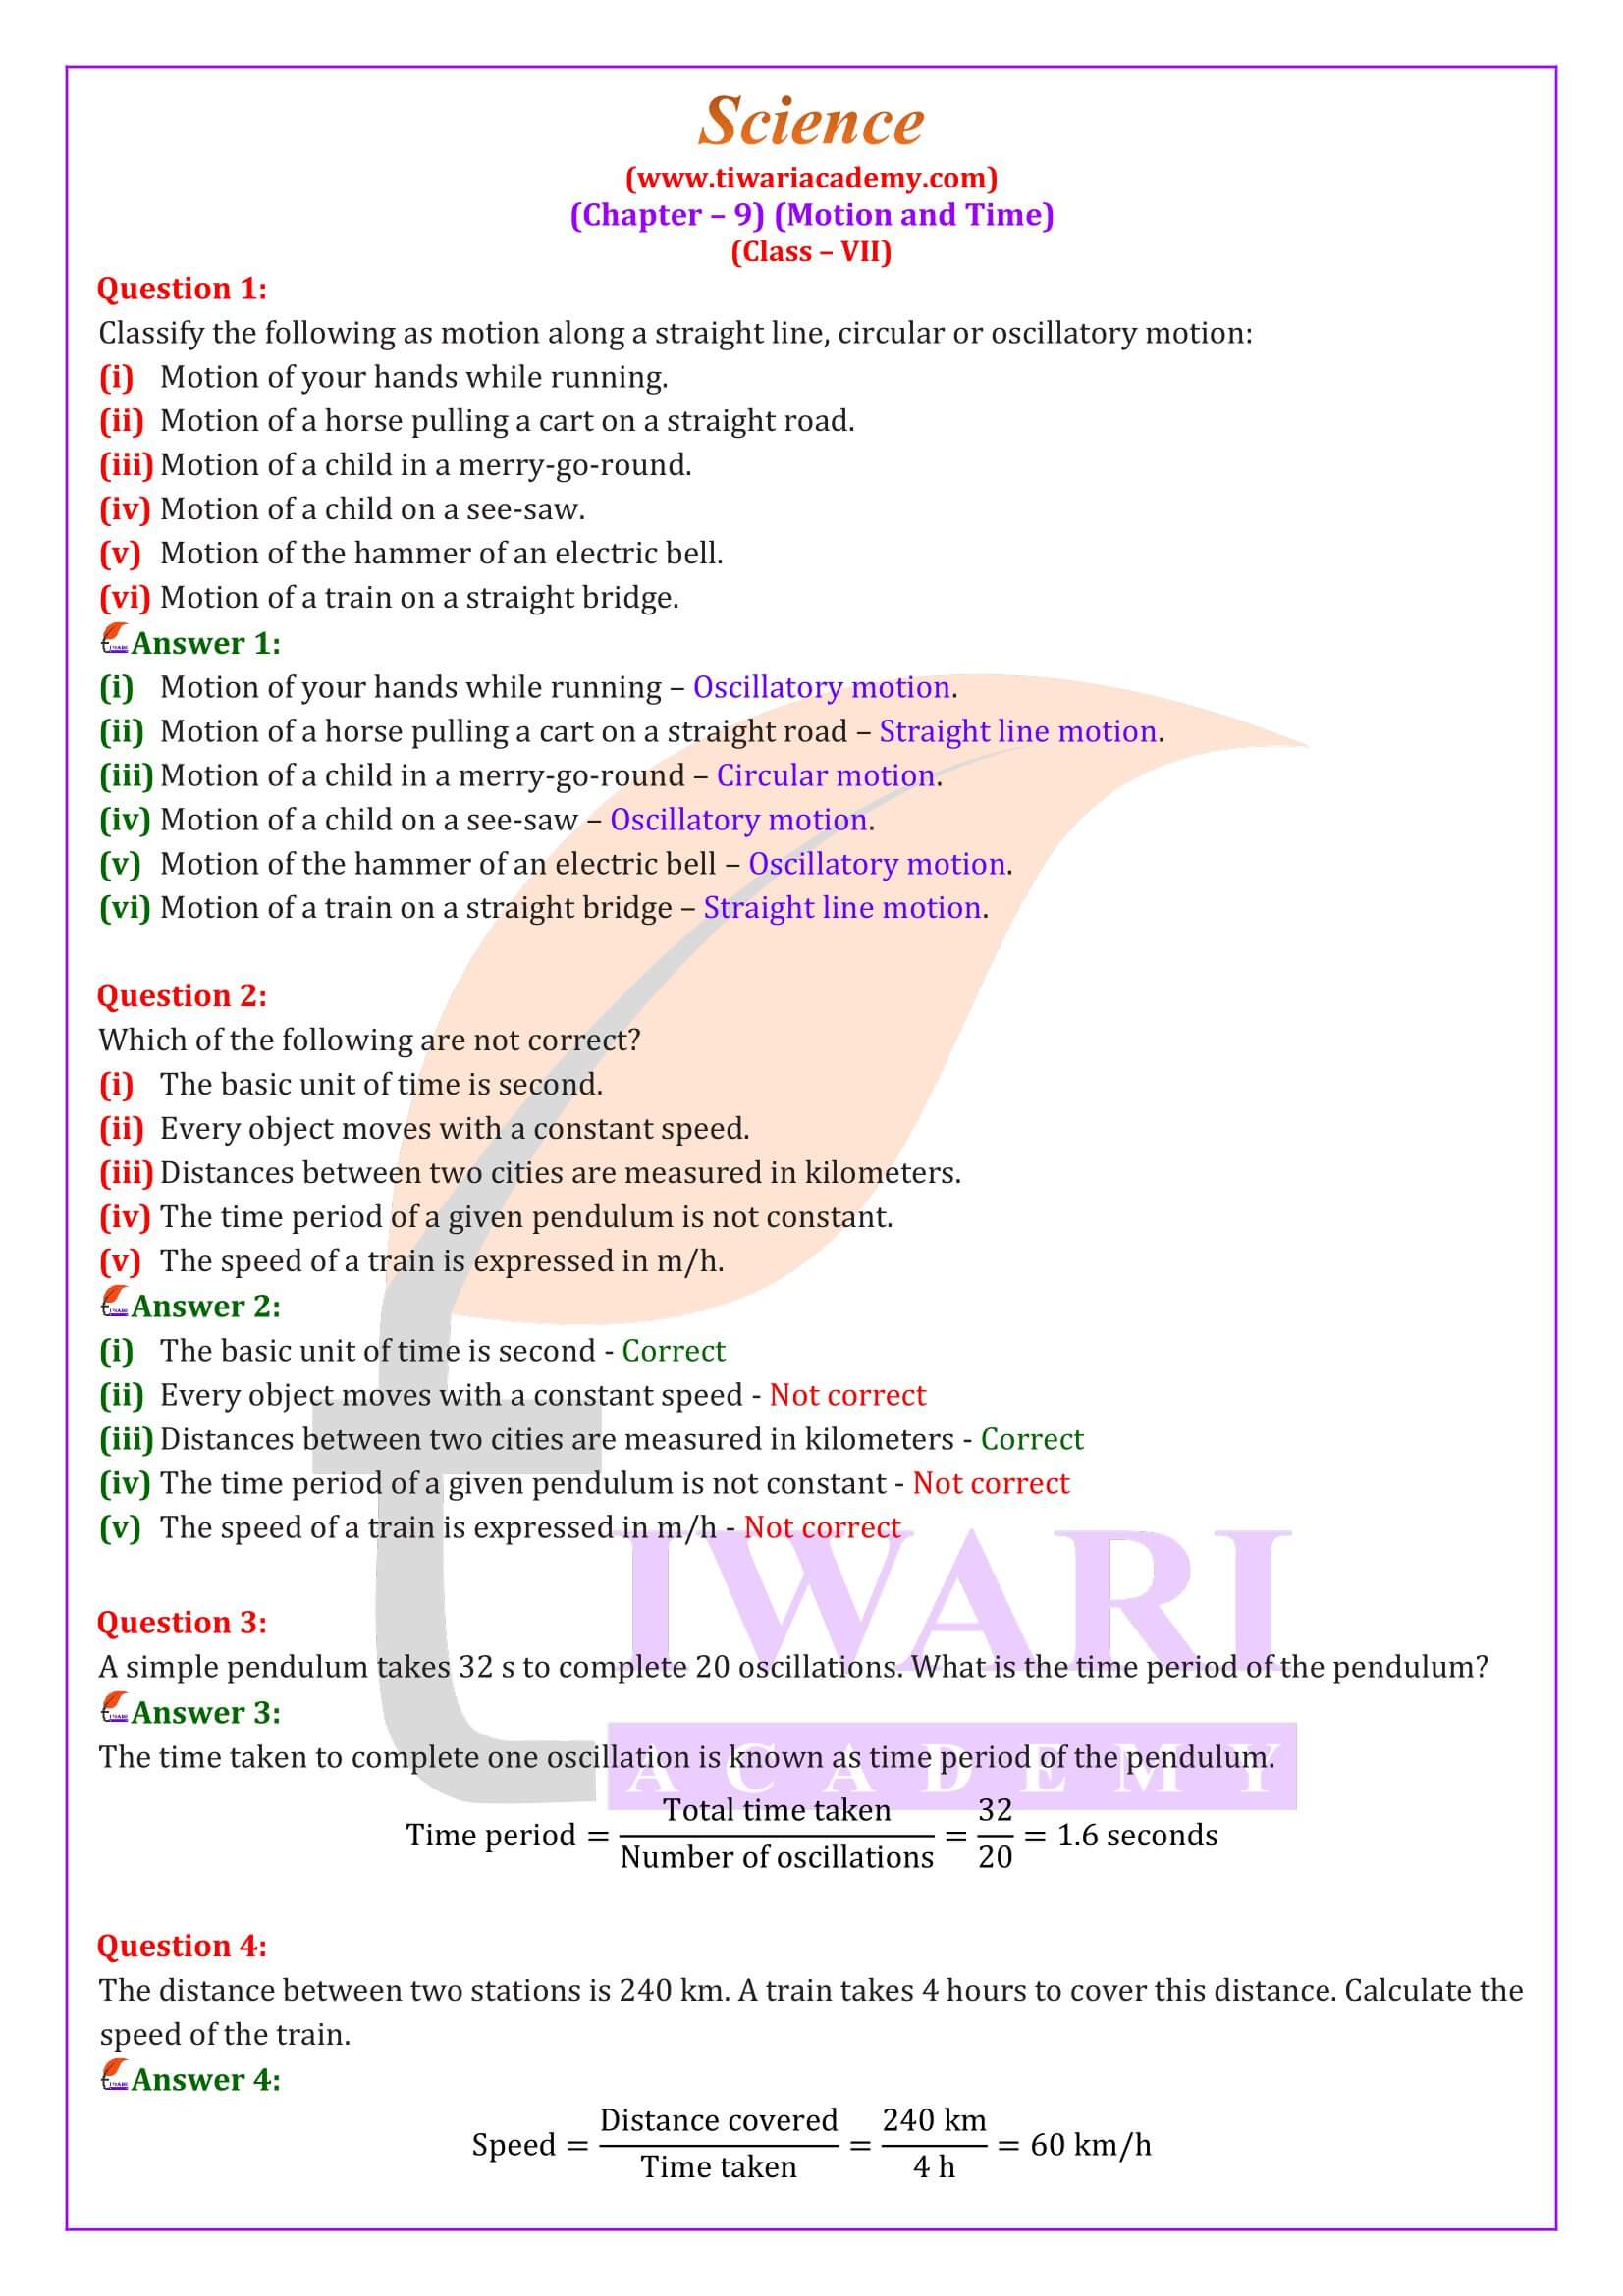 NCERT Solutions for Class 7 Science Chapter 9 in English Medium